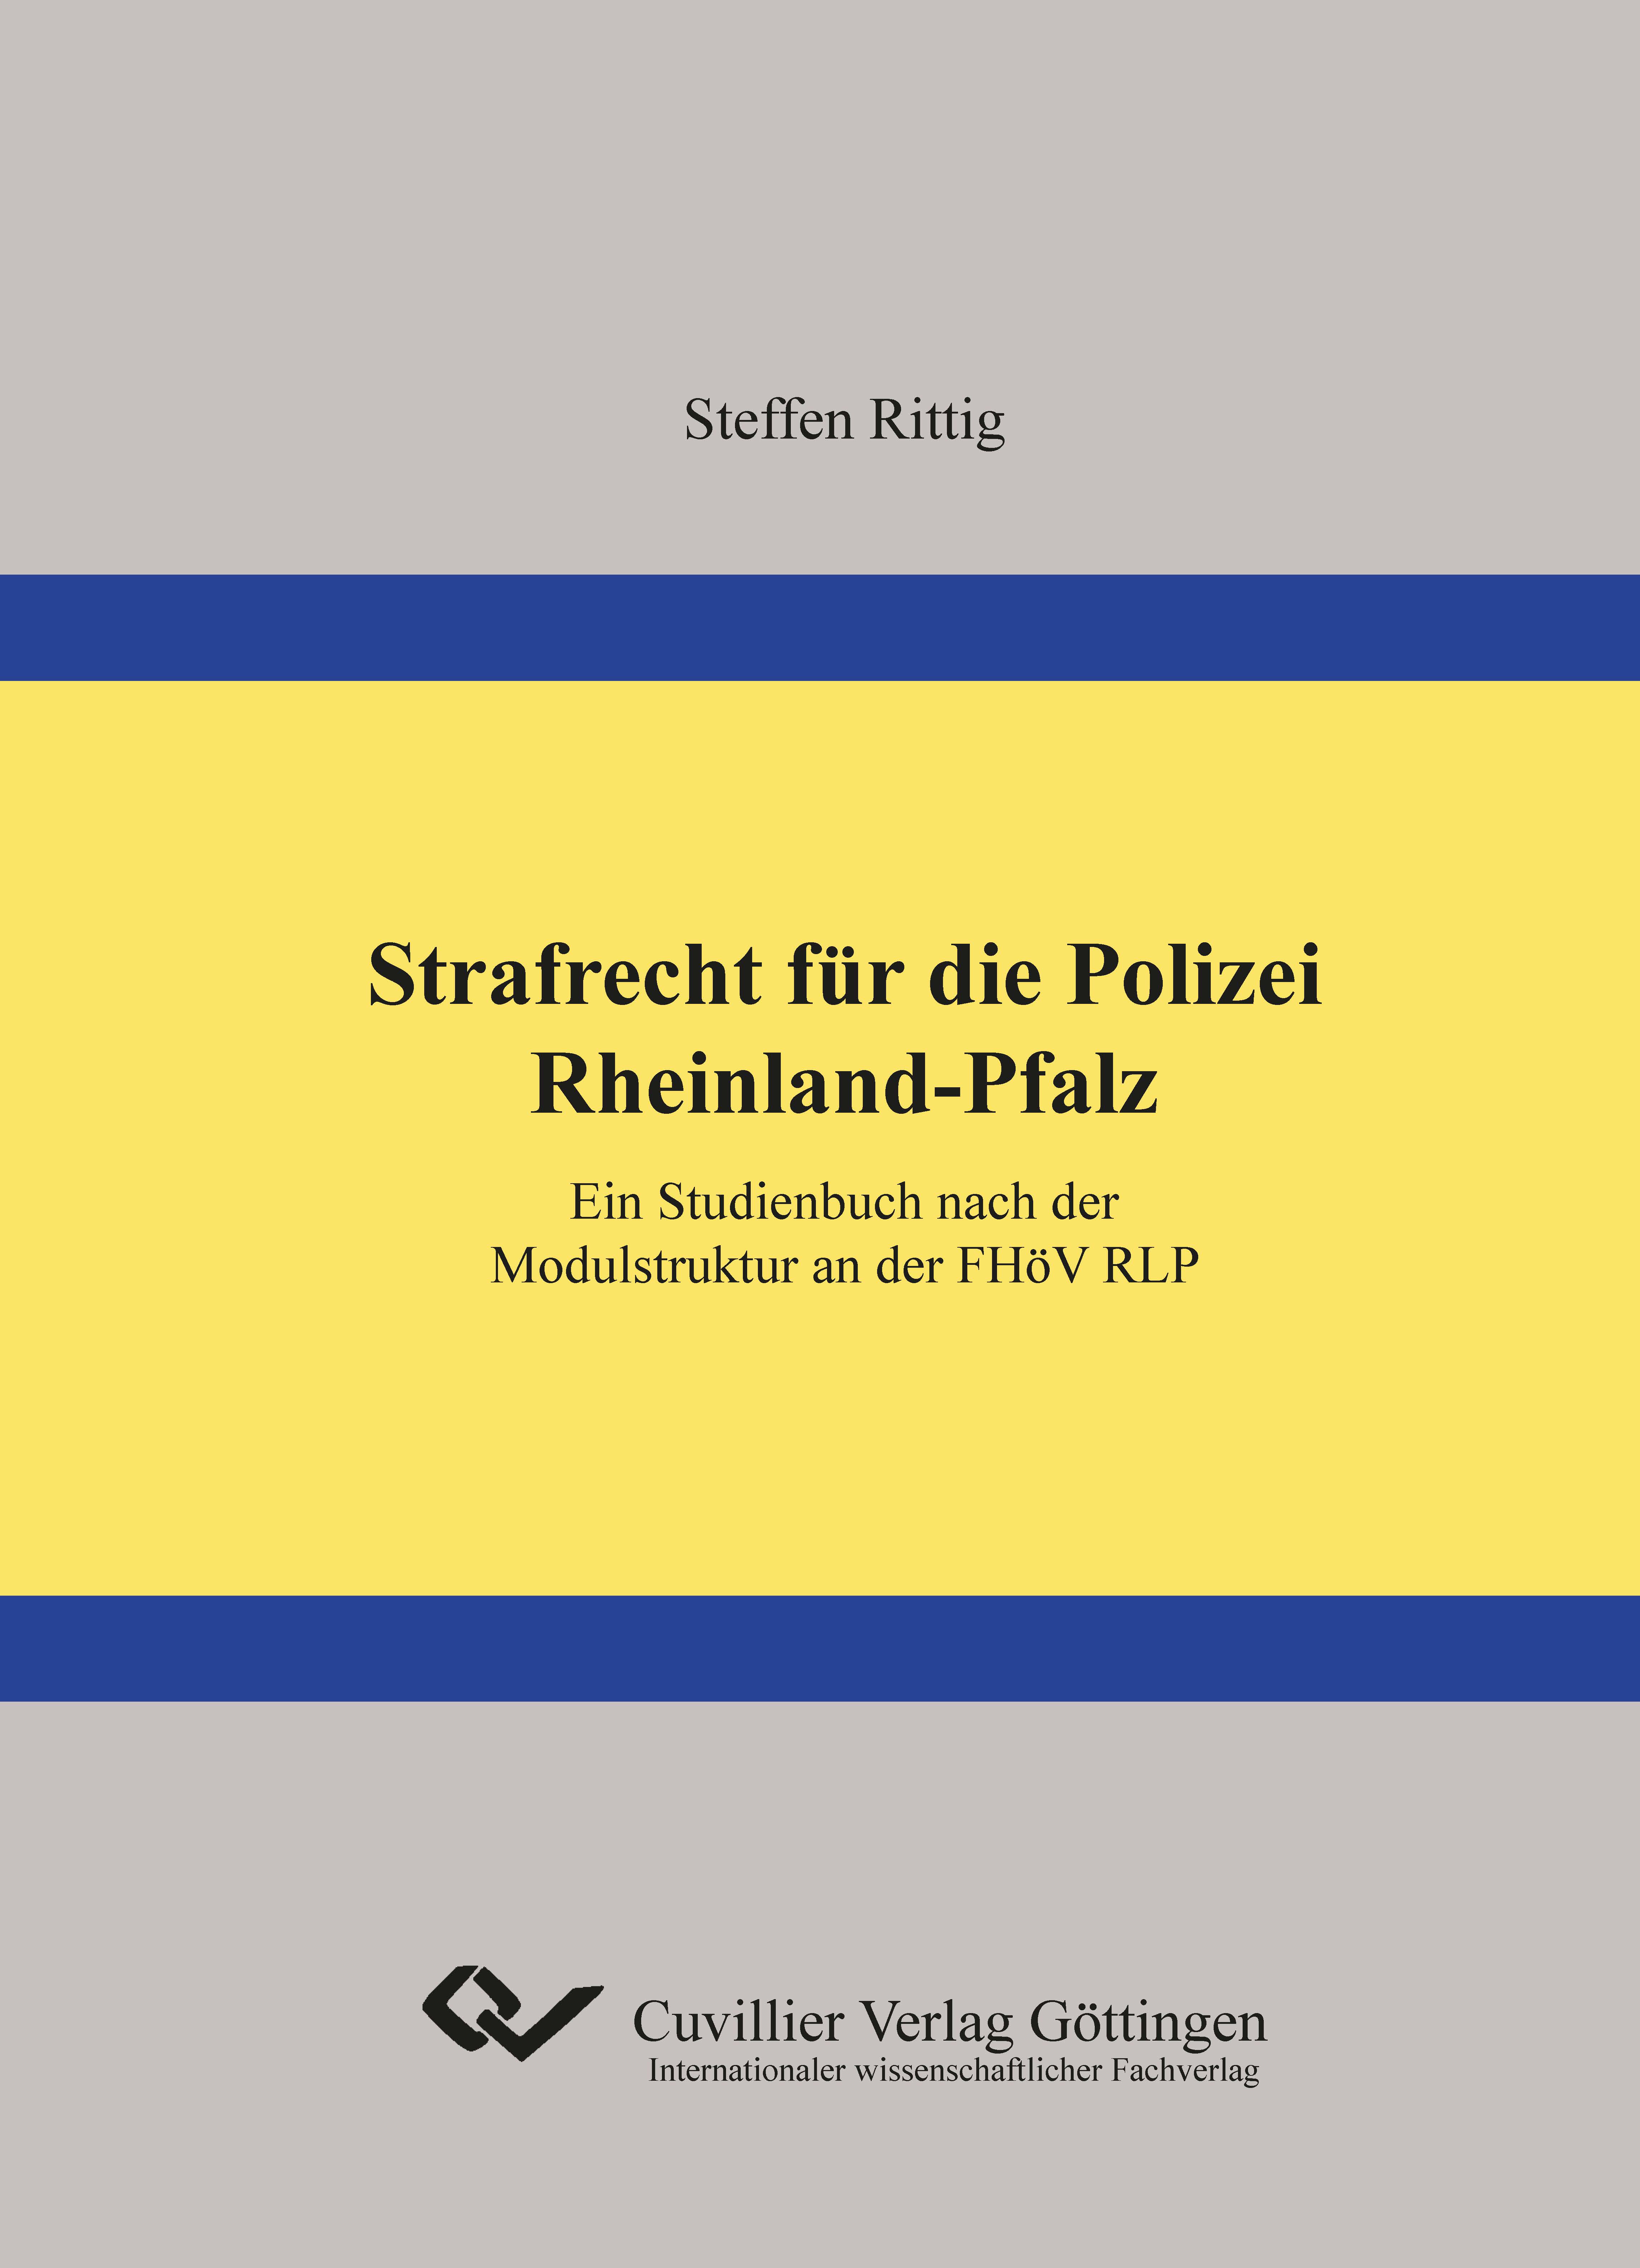 Criminal law for the police Rhineland-Palatinate ~ Steffen Rittig ~ 9783954046867 - Picture 1 of 1